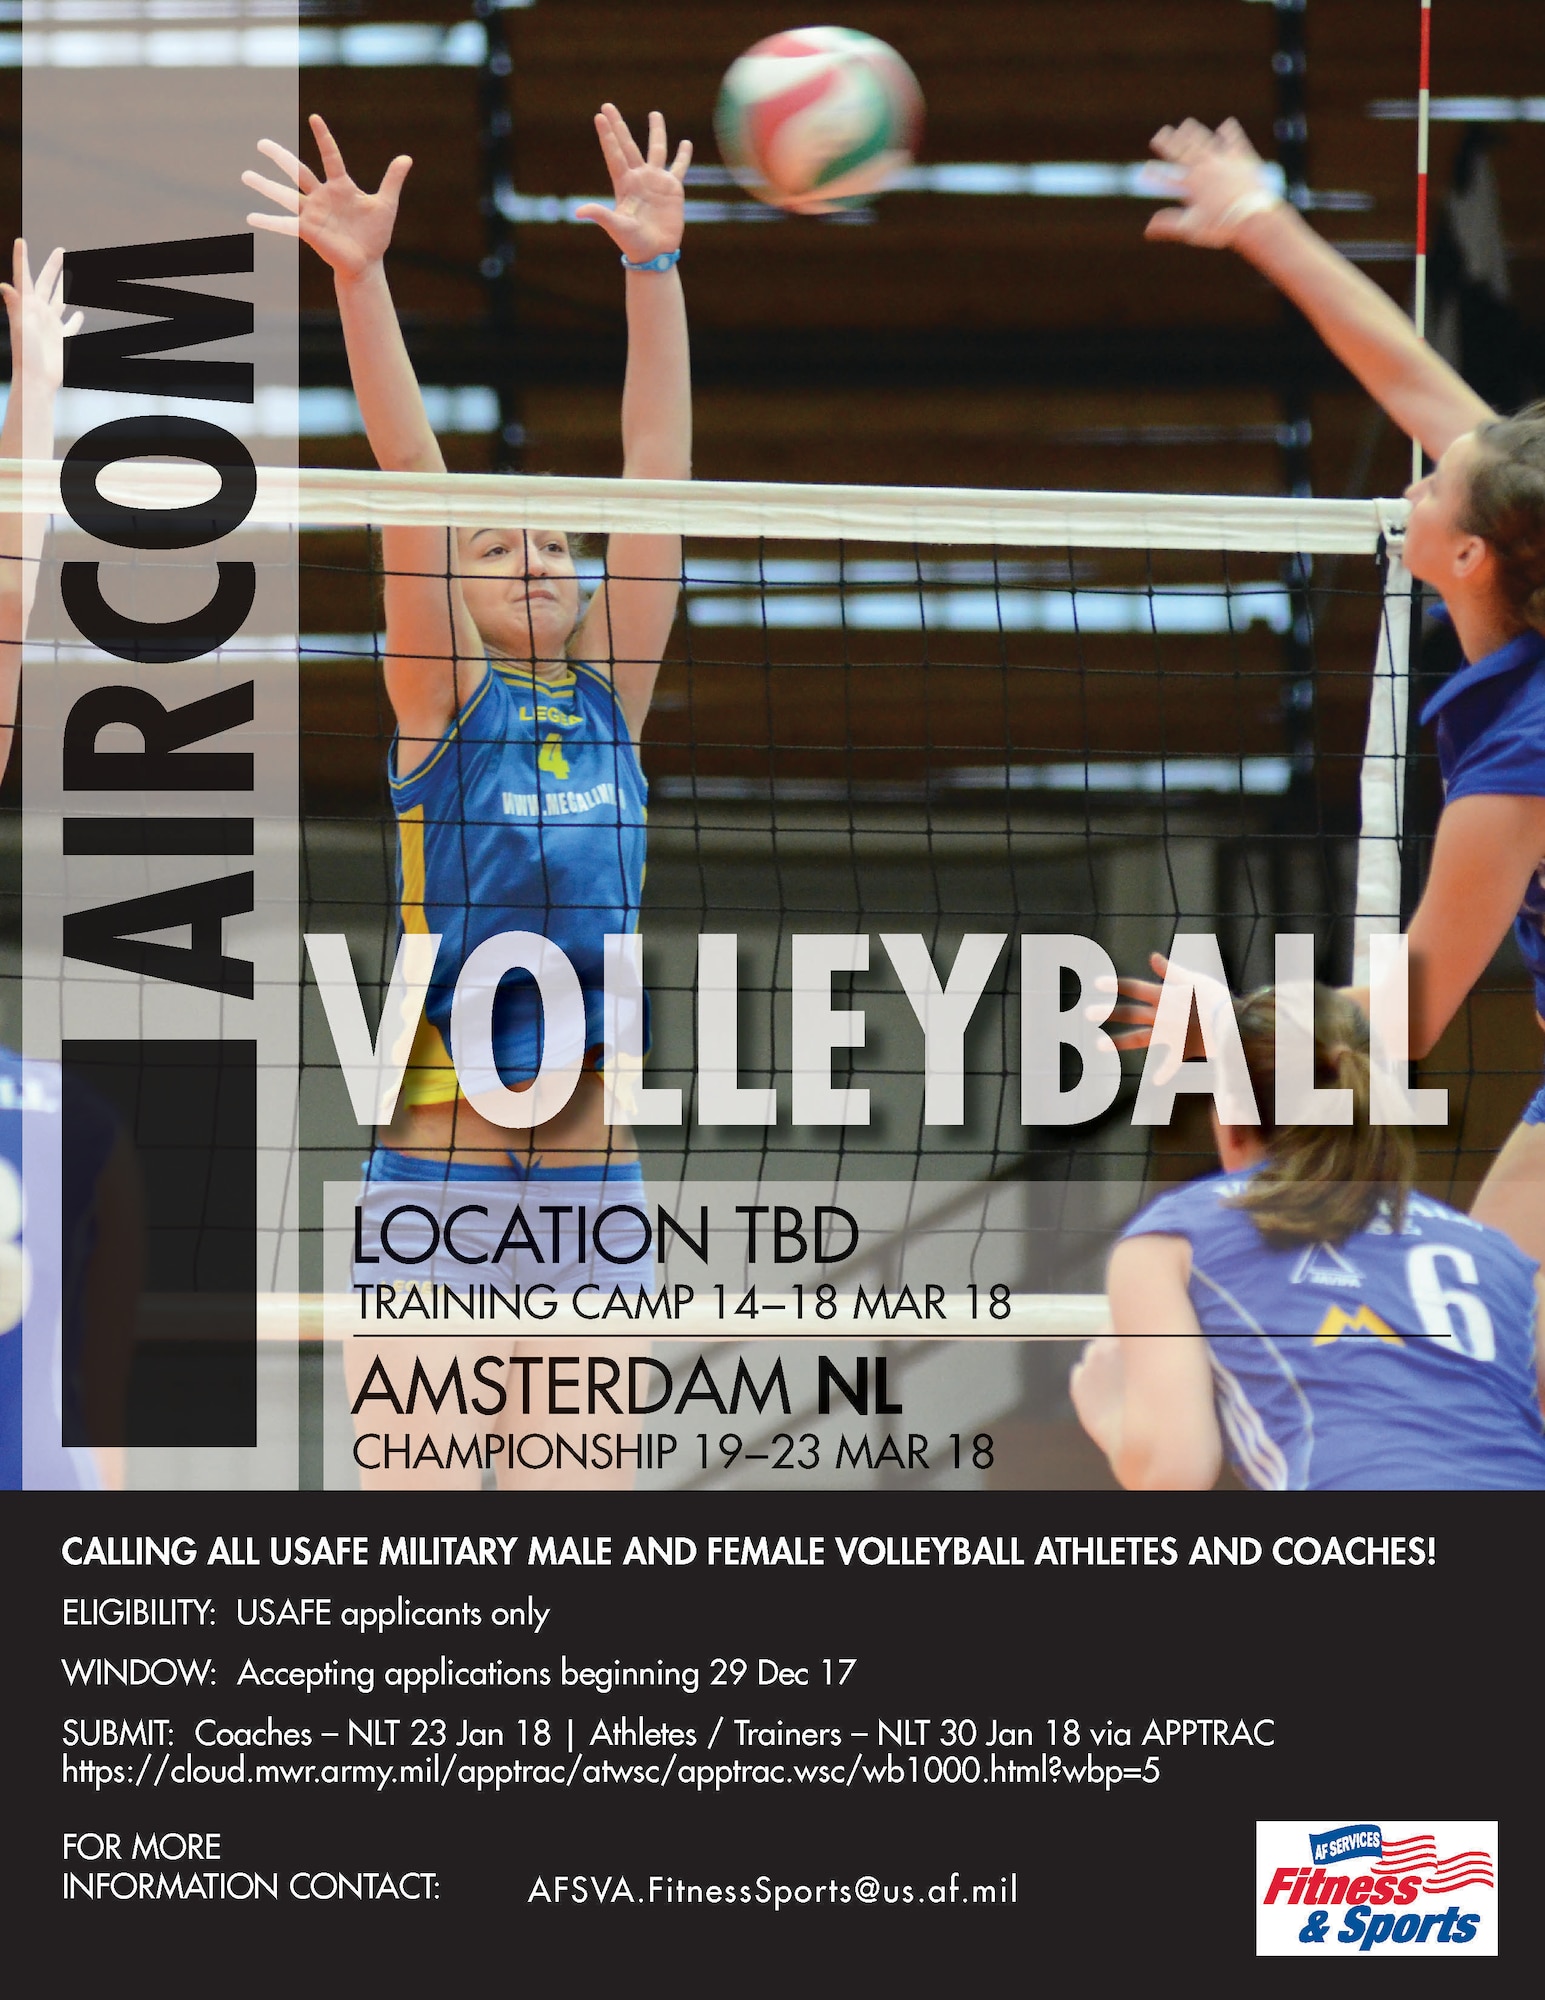 Call for USAFE Airmen to participate on the 2018 HQ Allied AIRCOM Volleyball team